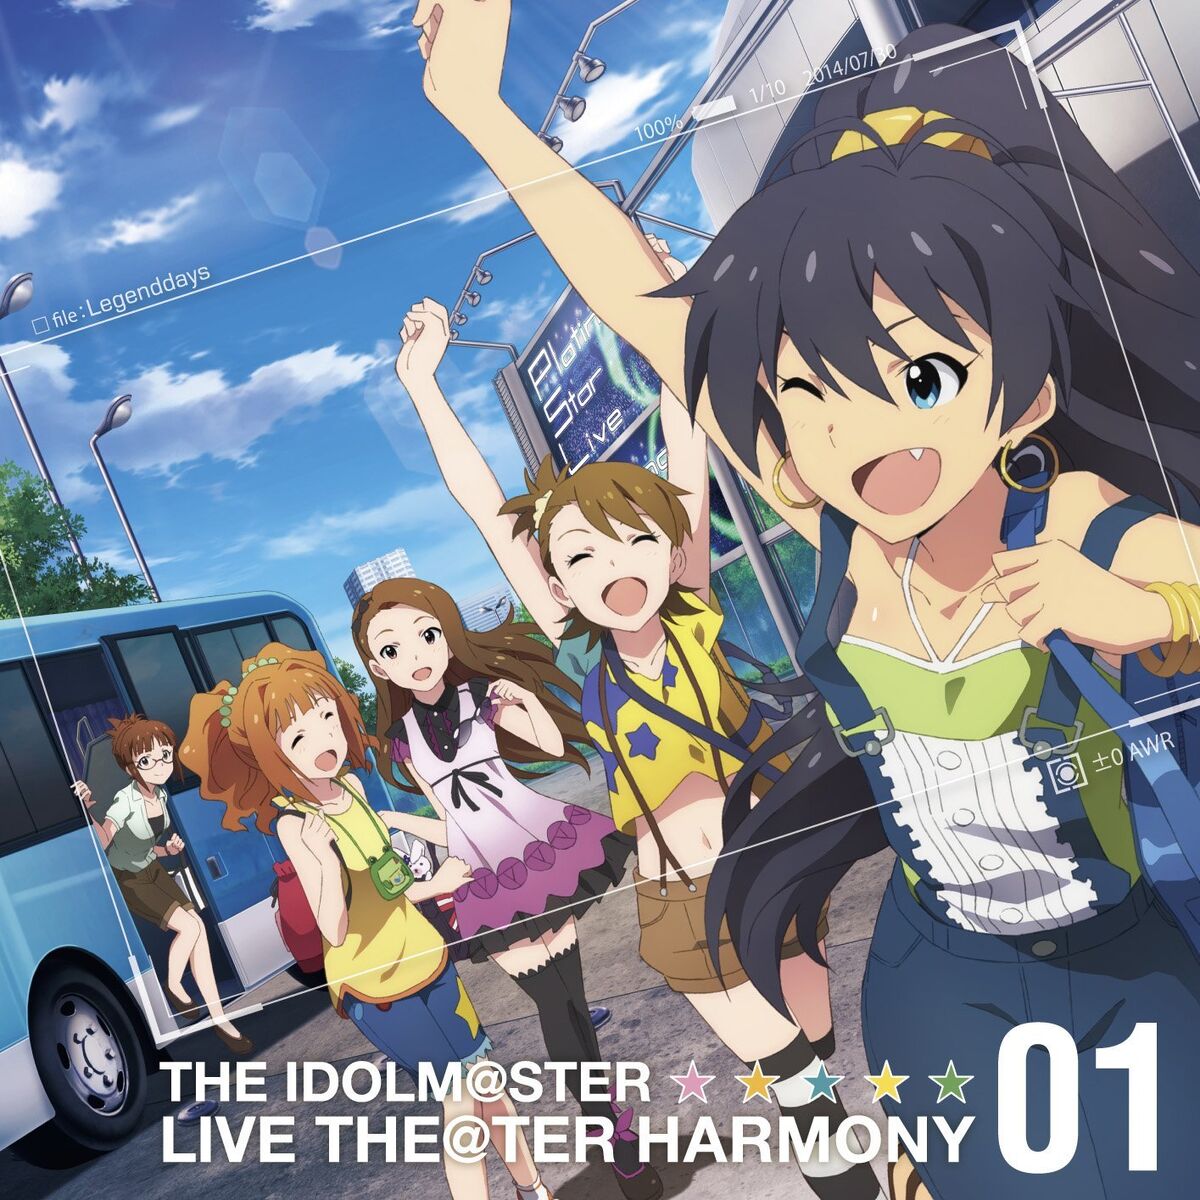 THE IDOLM@STER LIVE THE@TER HARMONY 01 | THE iDOLM 